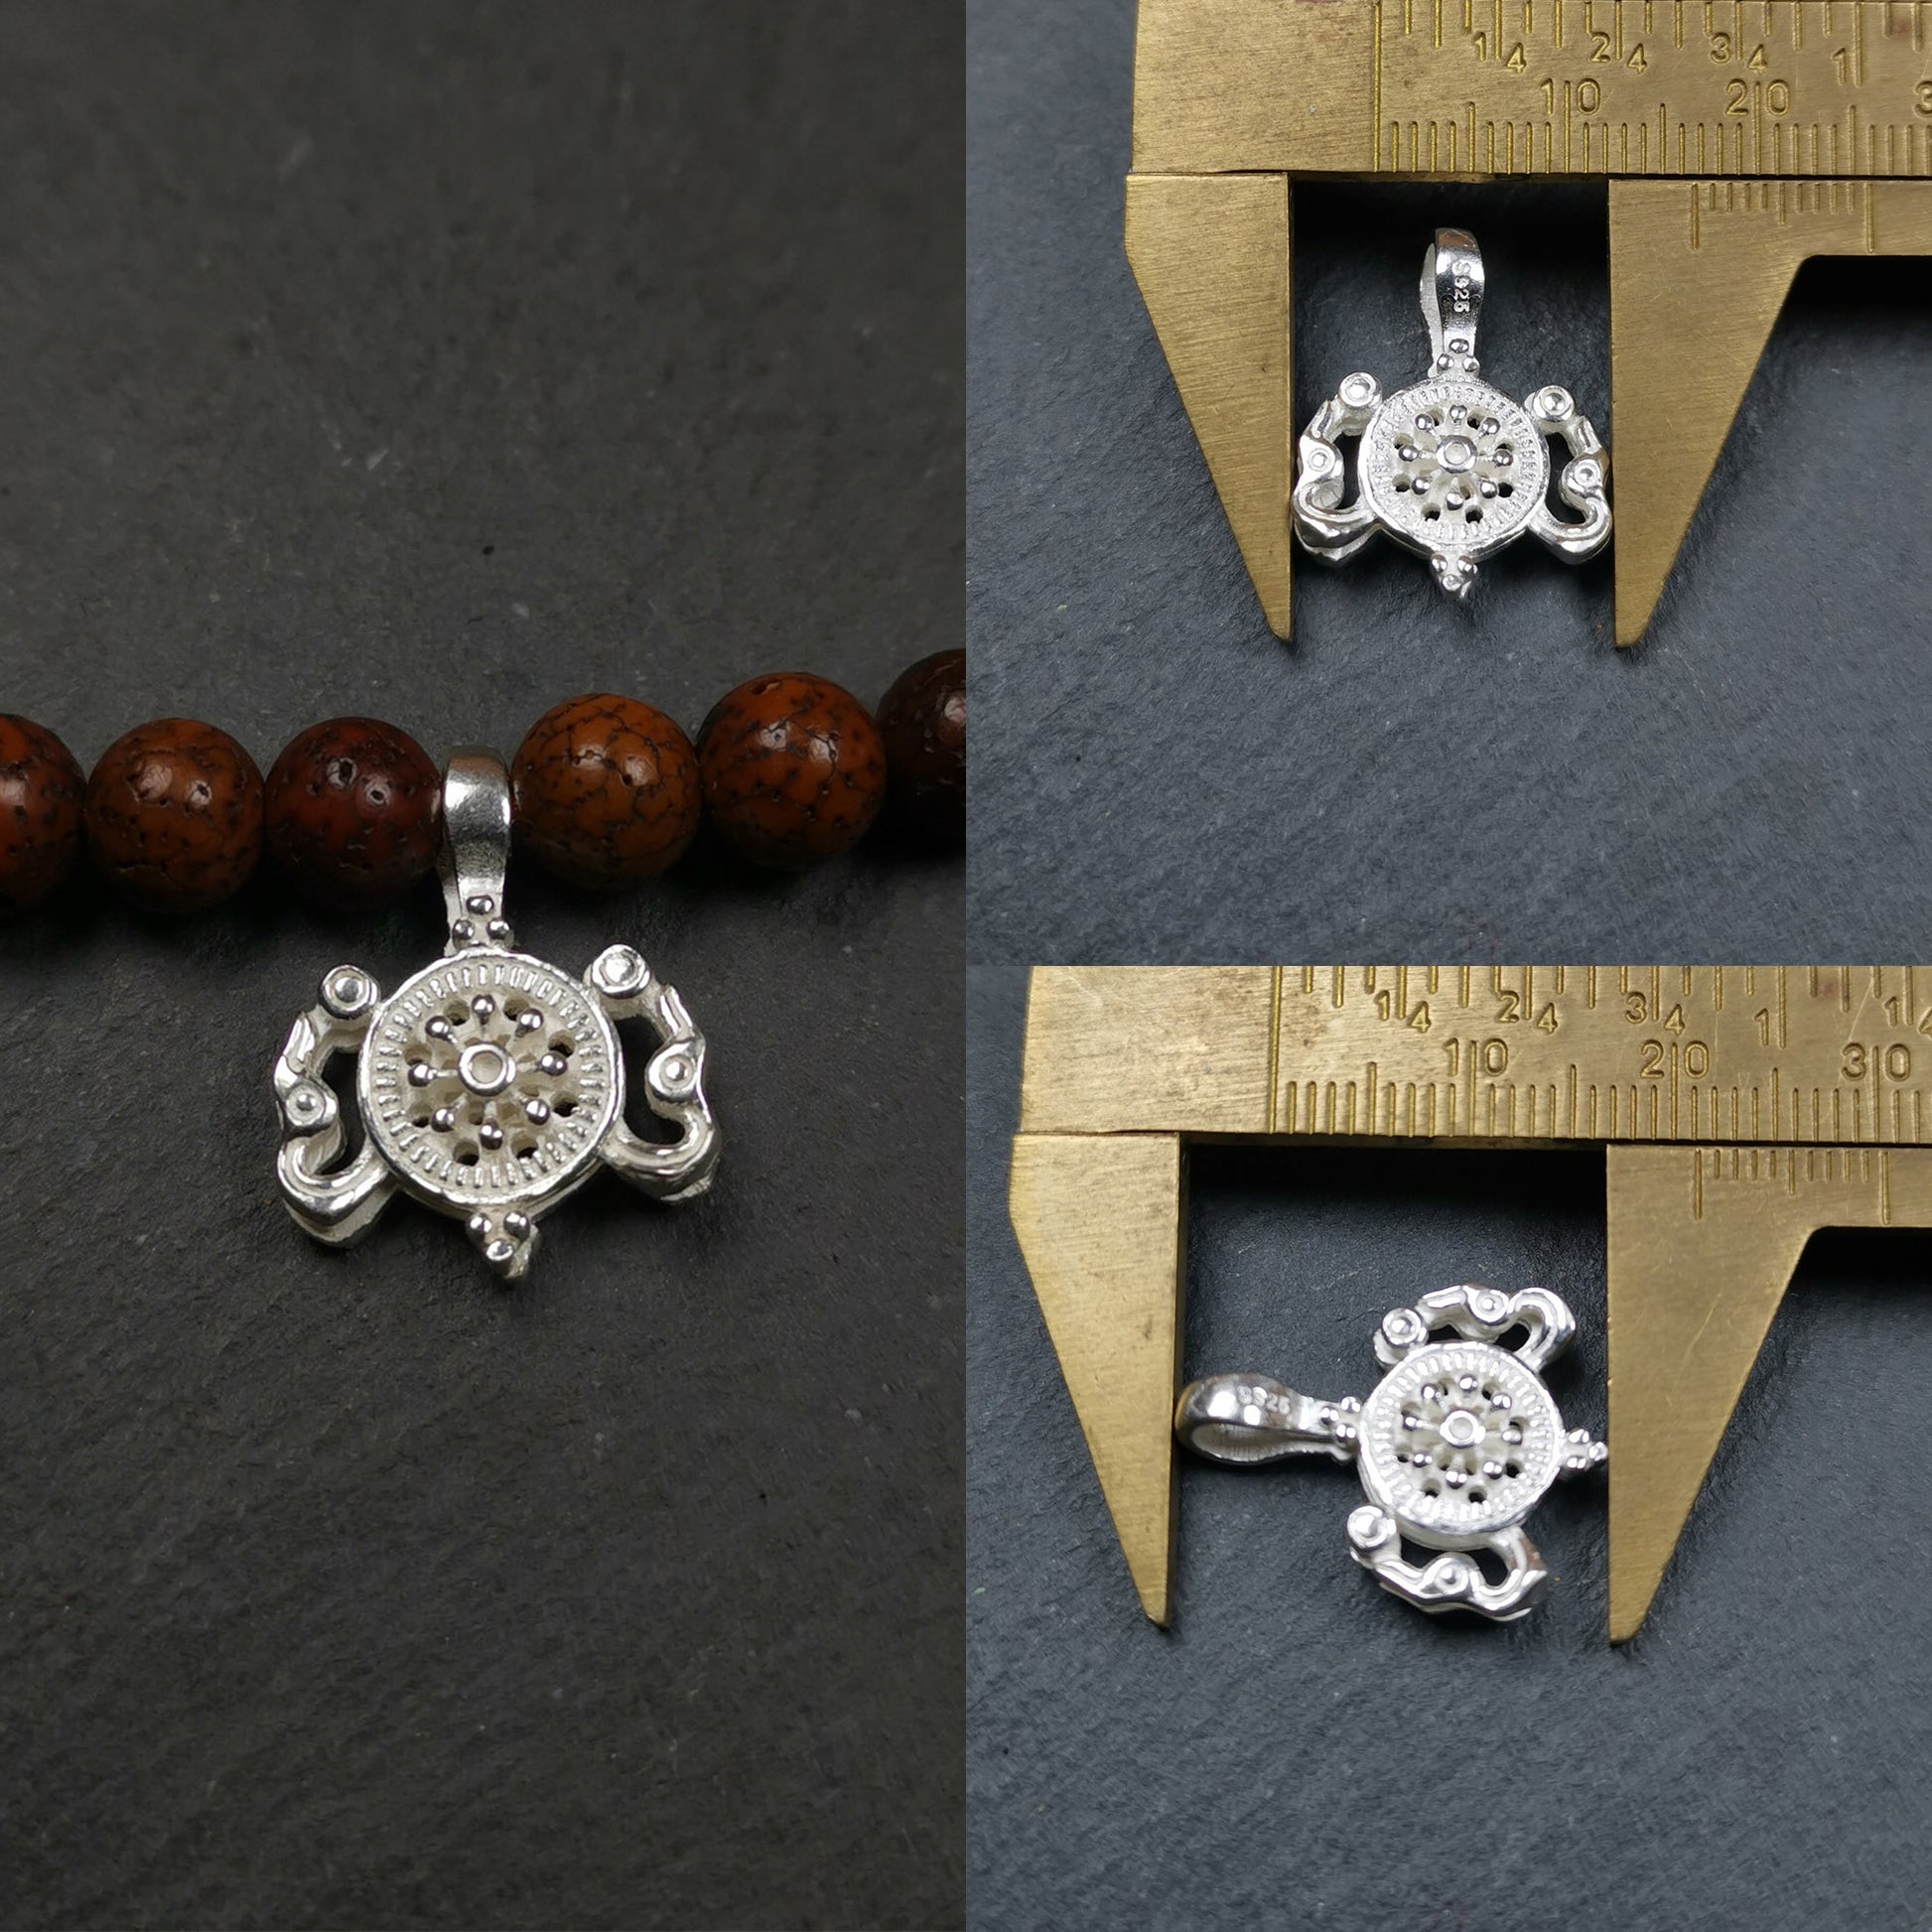 These bum counter clips are handmade by Tibetan craftsmen and come from Hepo Town, Baiyu County, the birthplace of the famous Tibetan handicrafts. Tibetan style counter used on malas/prayer beads to keep count of mantra recitation and accumulation.  Recommended size, suitable for 8-15mm mala. The background reference is 8mm lotus seed mala.